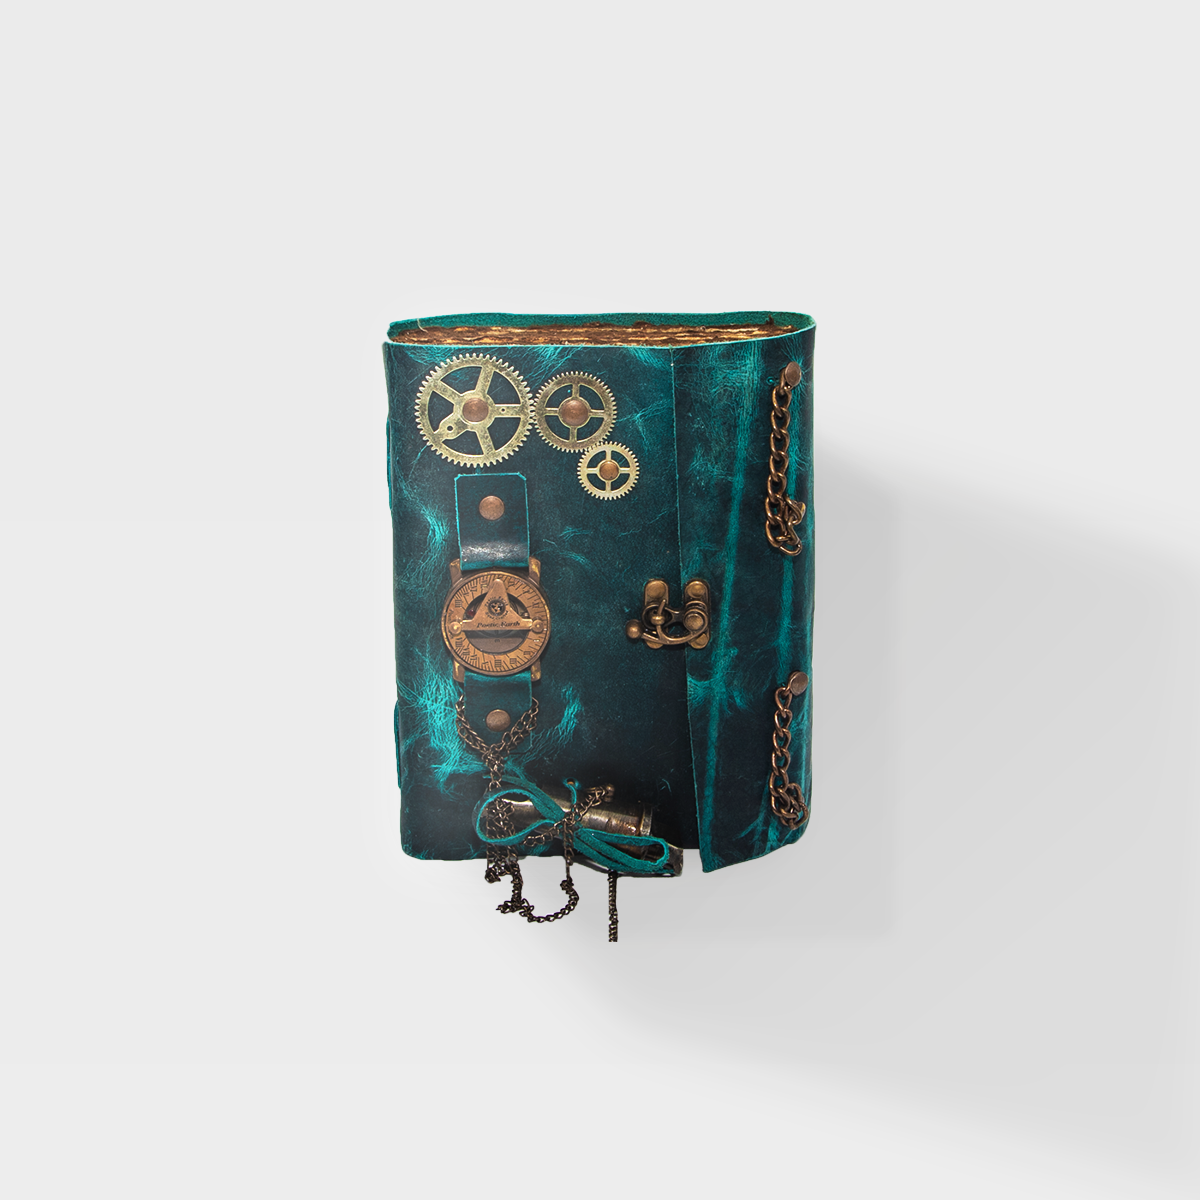 Time Travelers Steam Punk - 6x9 - Turquoise Leather Journal